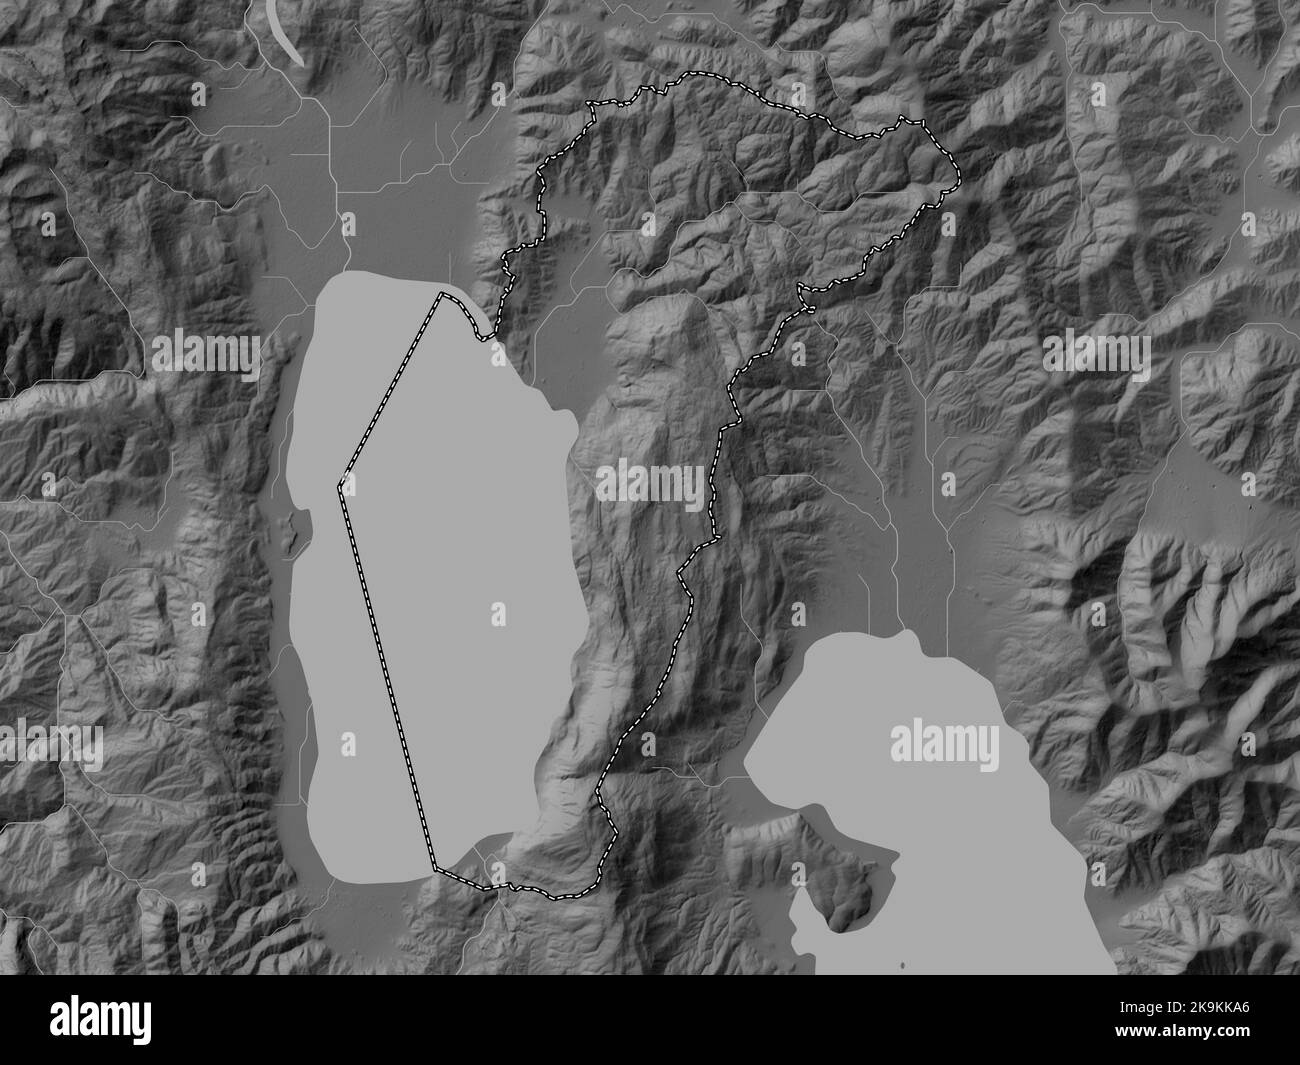 Ohrid, municipality of Macedonia. Grayscale elevation map with lakes and rivers Stock Photo